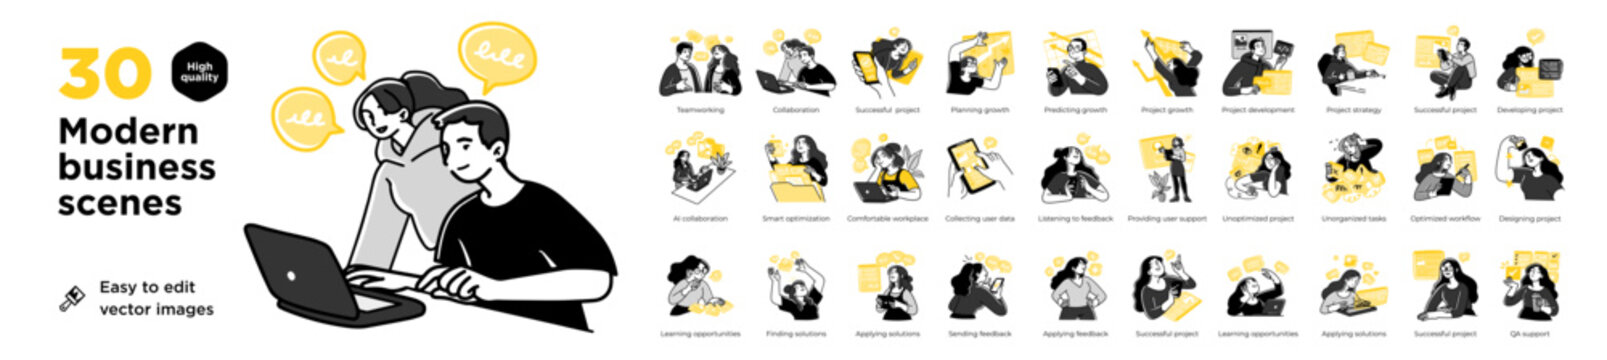 Fototapeta Business Concept illustrations. Mega set. Collection of scenes with men and women taking part in business activities. Vector illustration